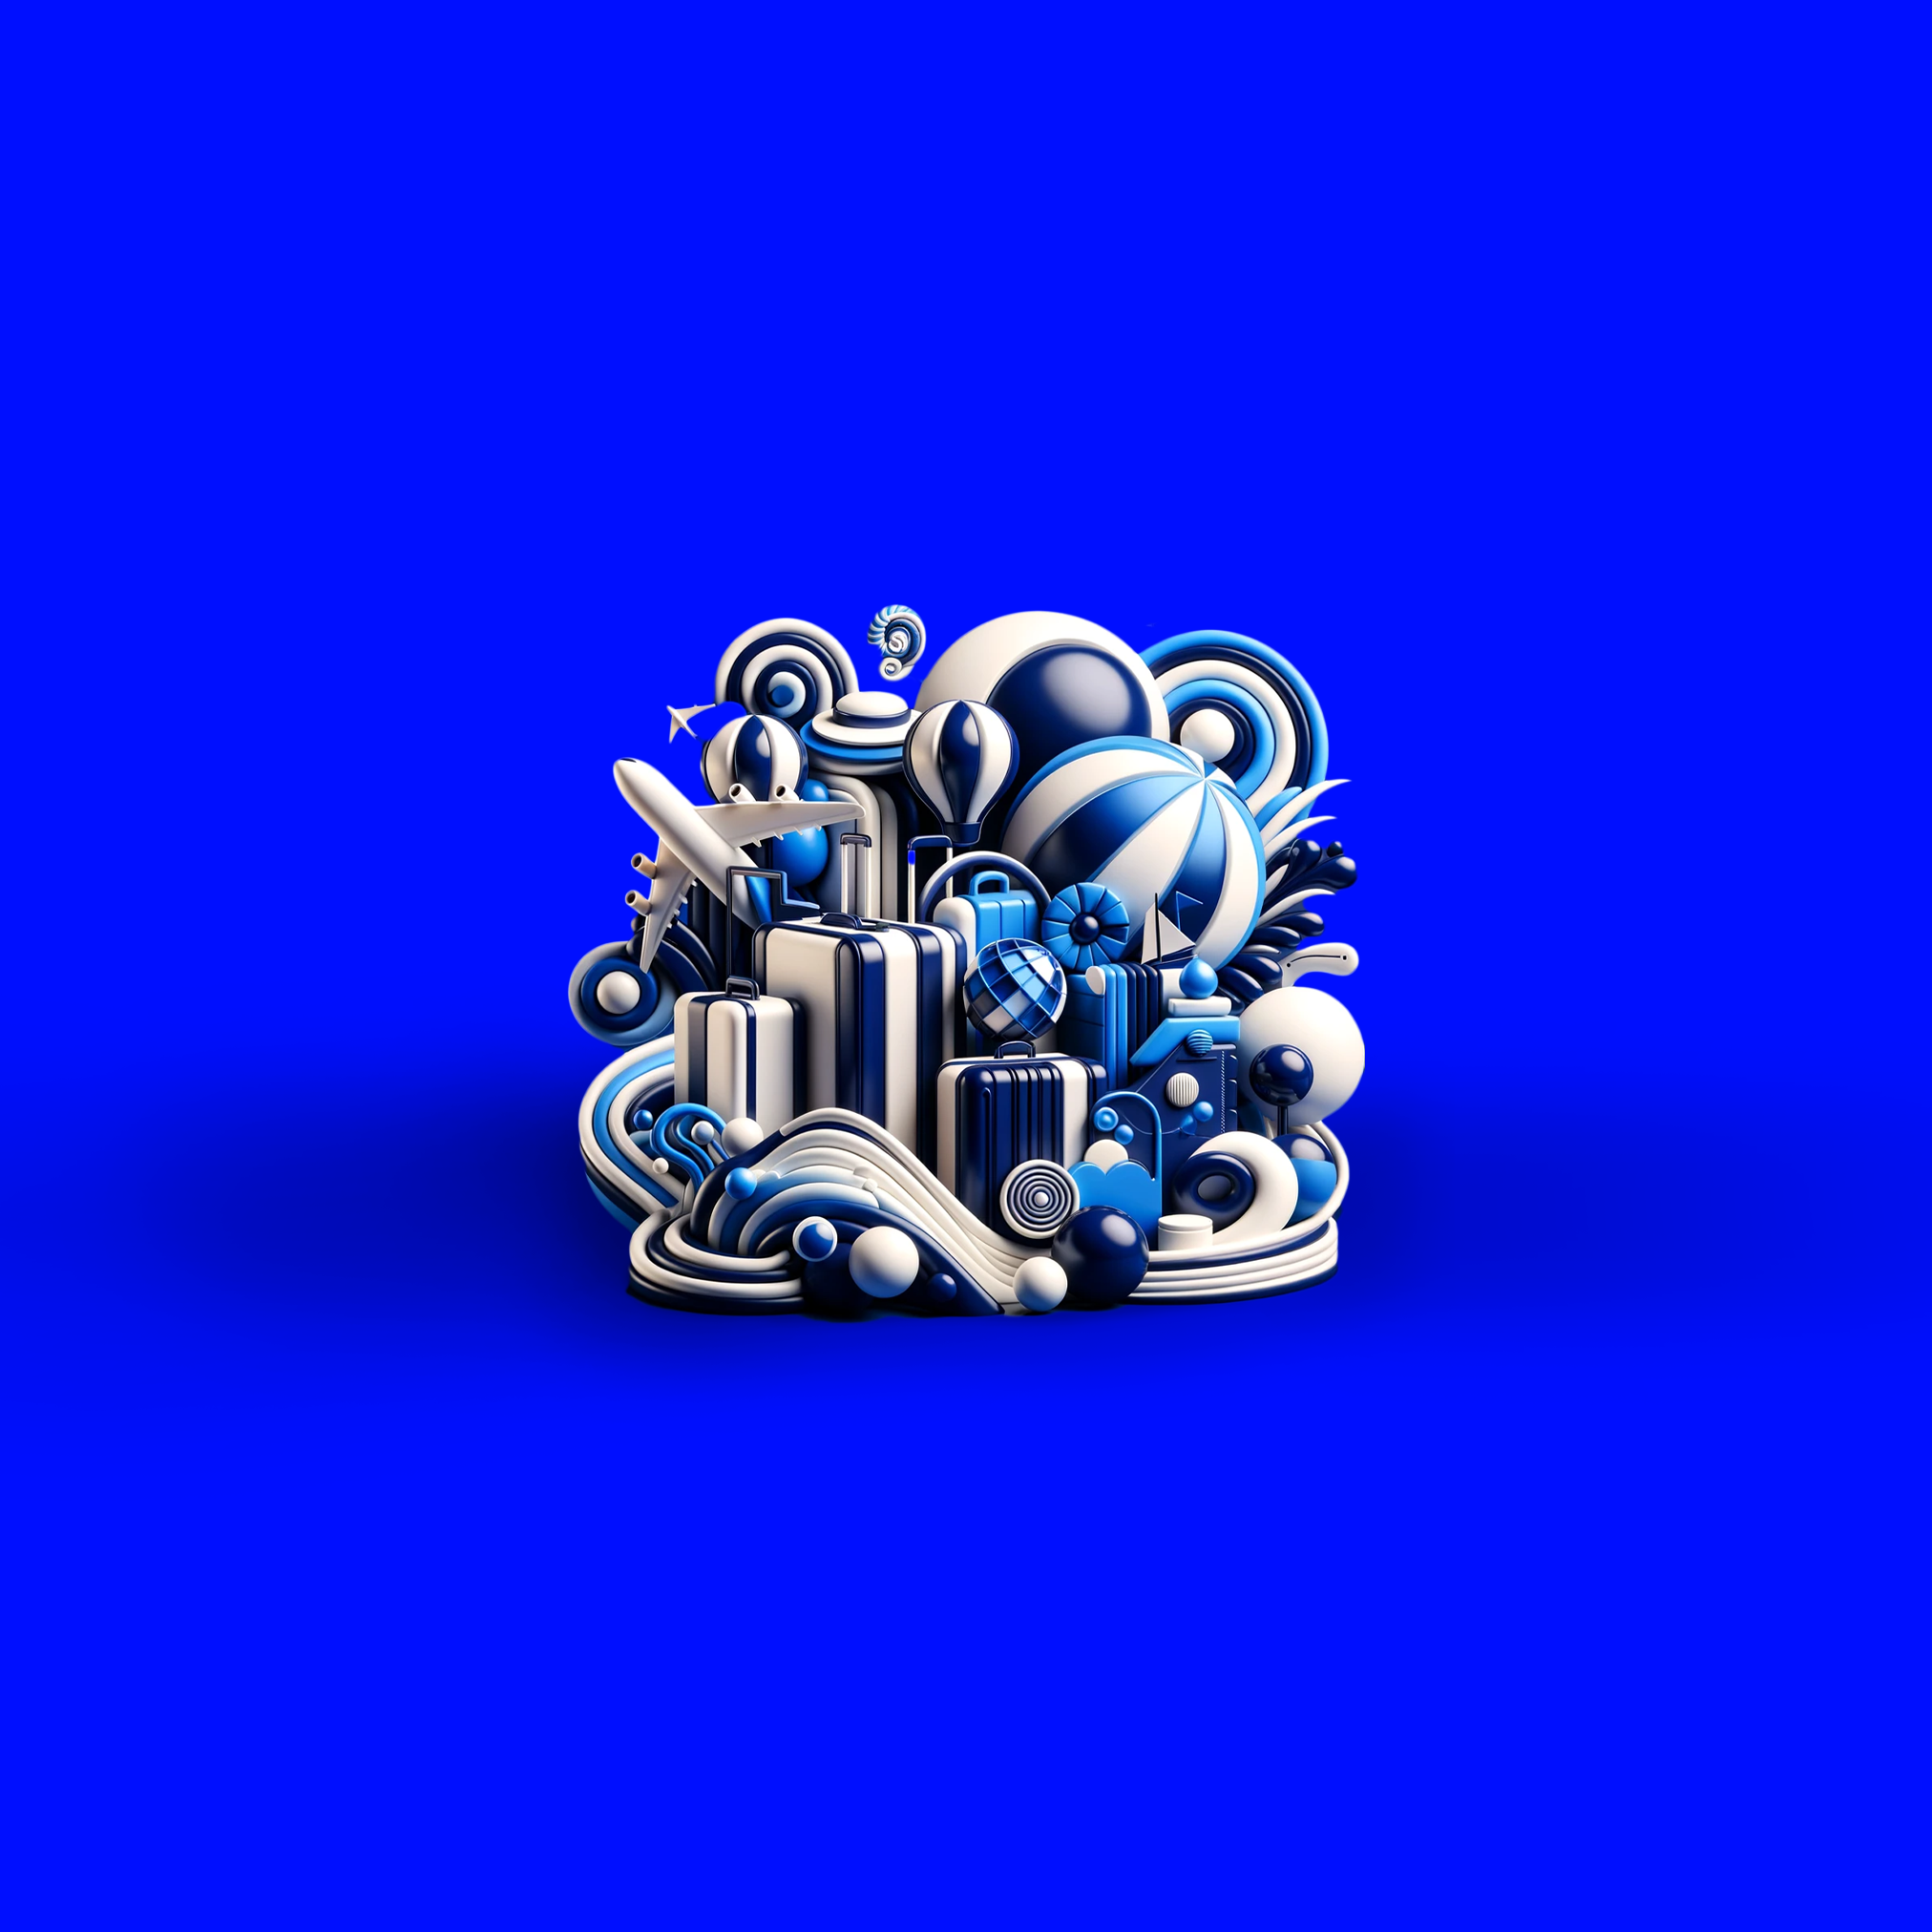 An abstract composition of 3D shapes and objects in various shades of blue, creating a playful and intricate visual ensemble against a monochromatic background